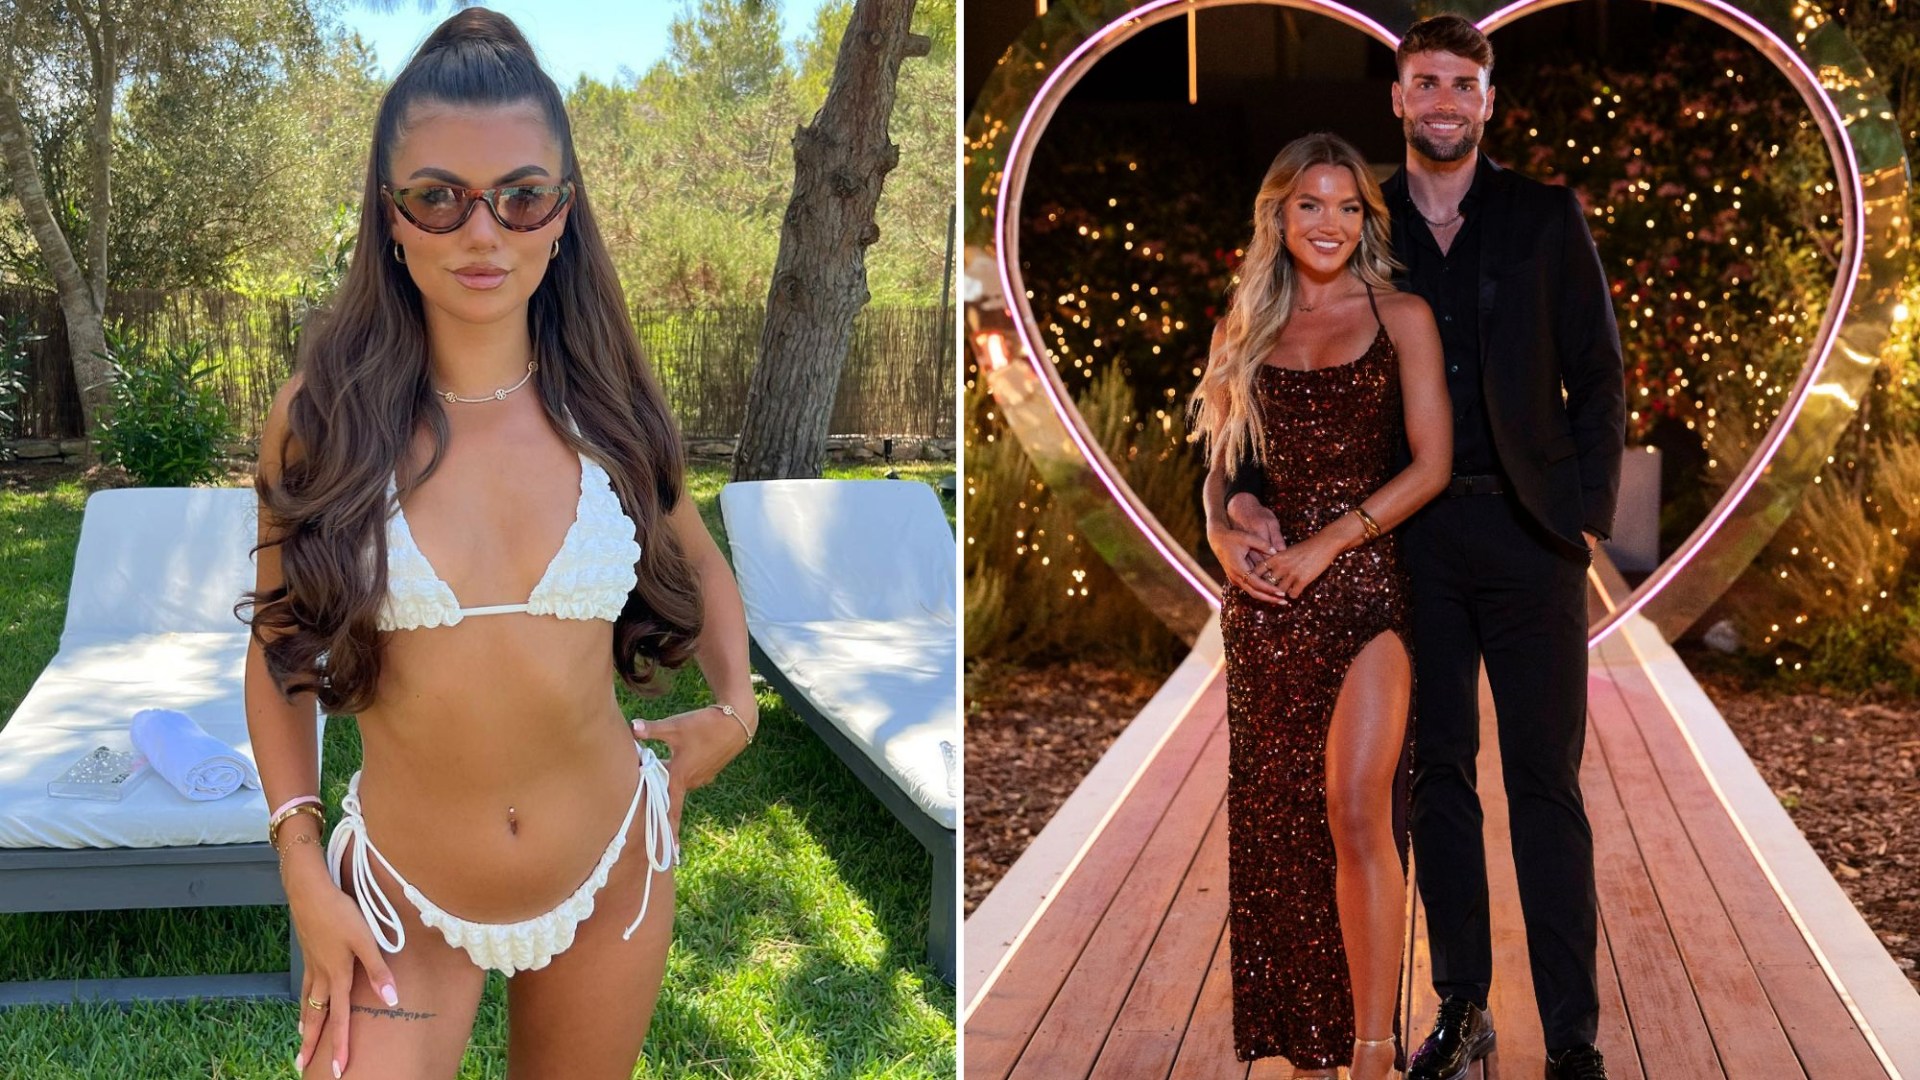 Love Island’s Samie Elishi Finds New Love with Towie Star After All Stars Win